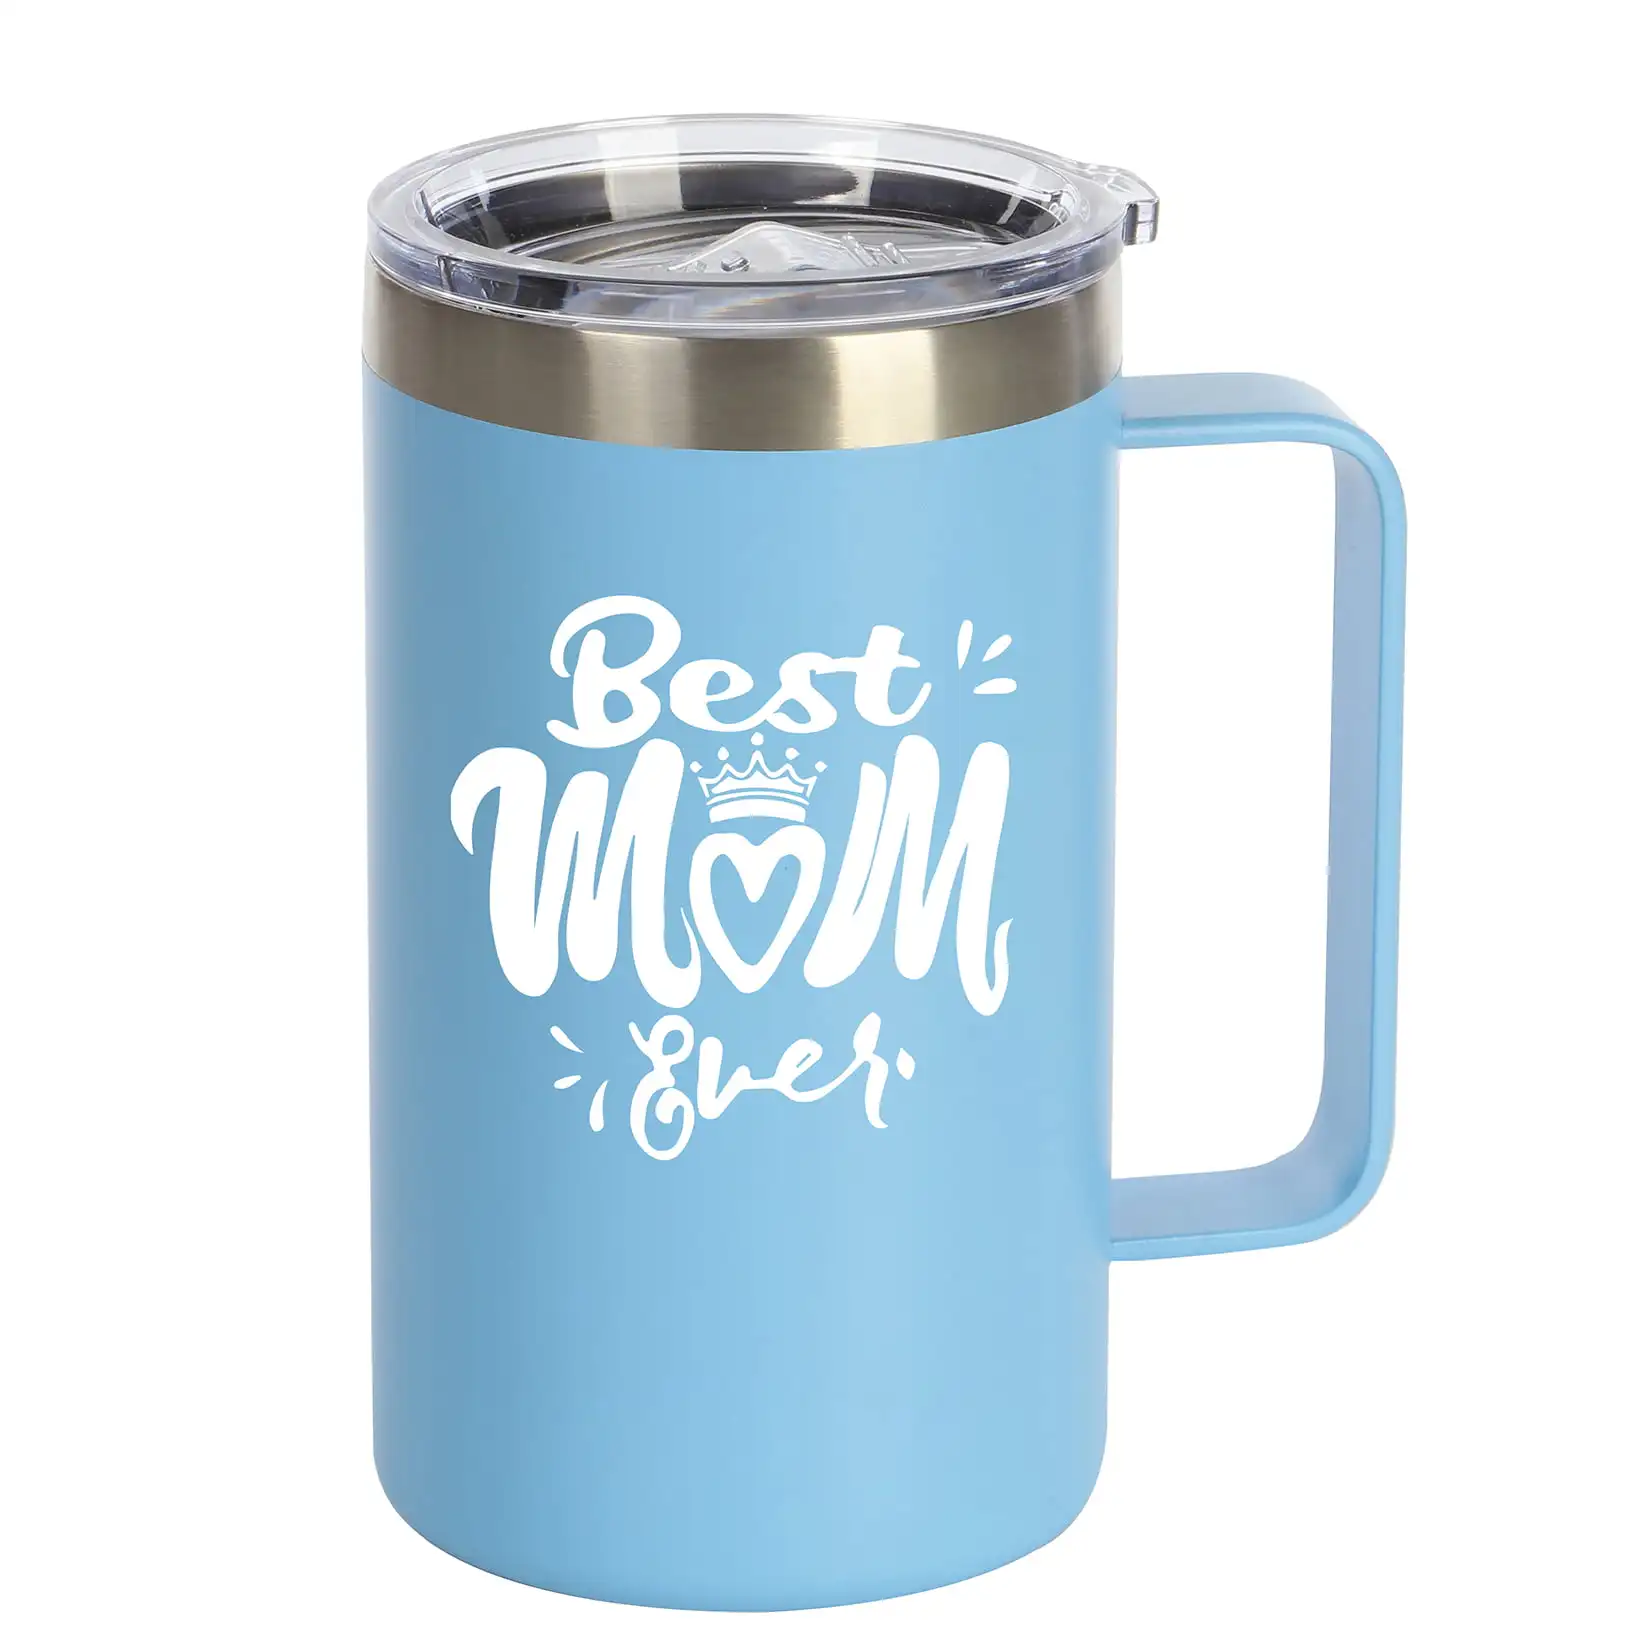 Best Mom Gift - Ezprogear 40 oz Stainless Steel Insulated Tumbler Water Cup  (40 oz, Best Mom White)